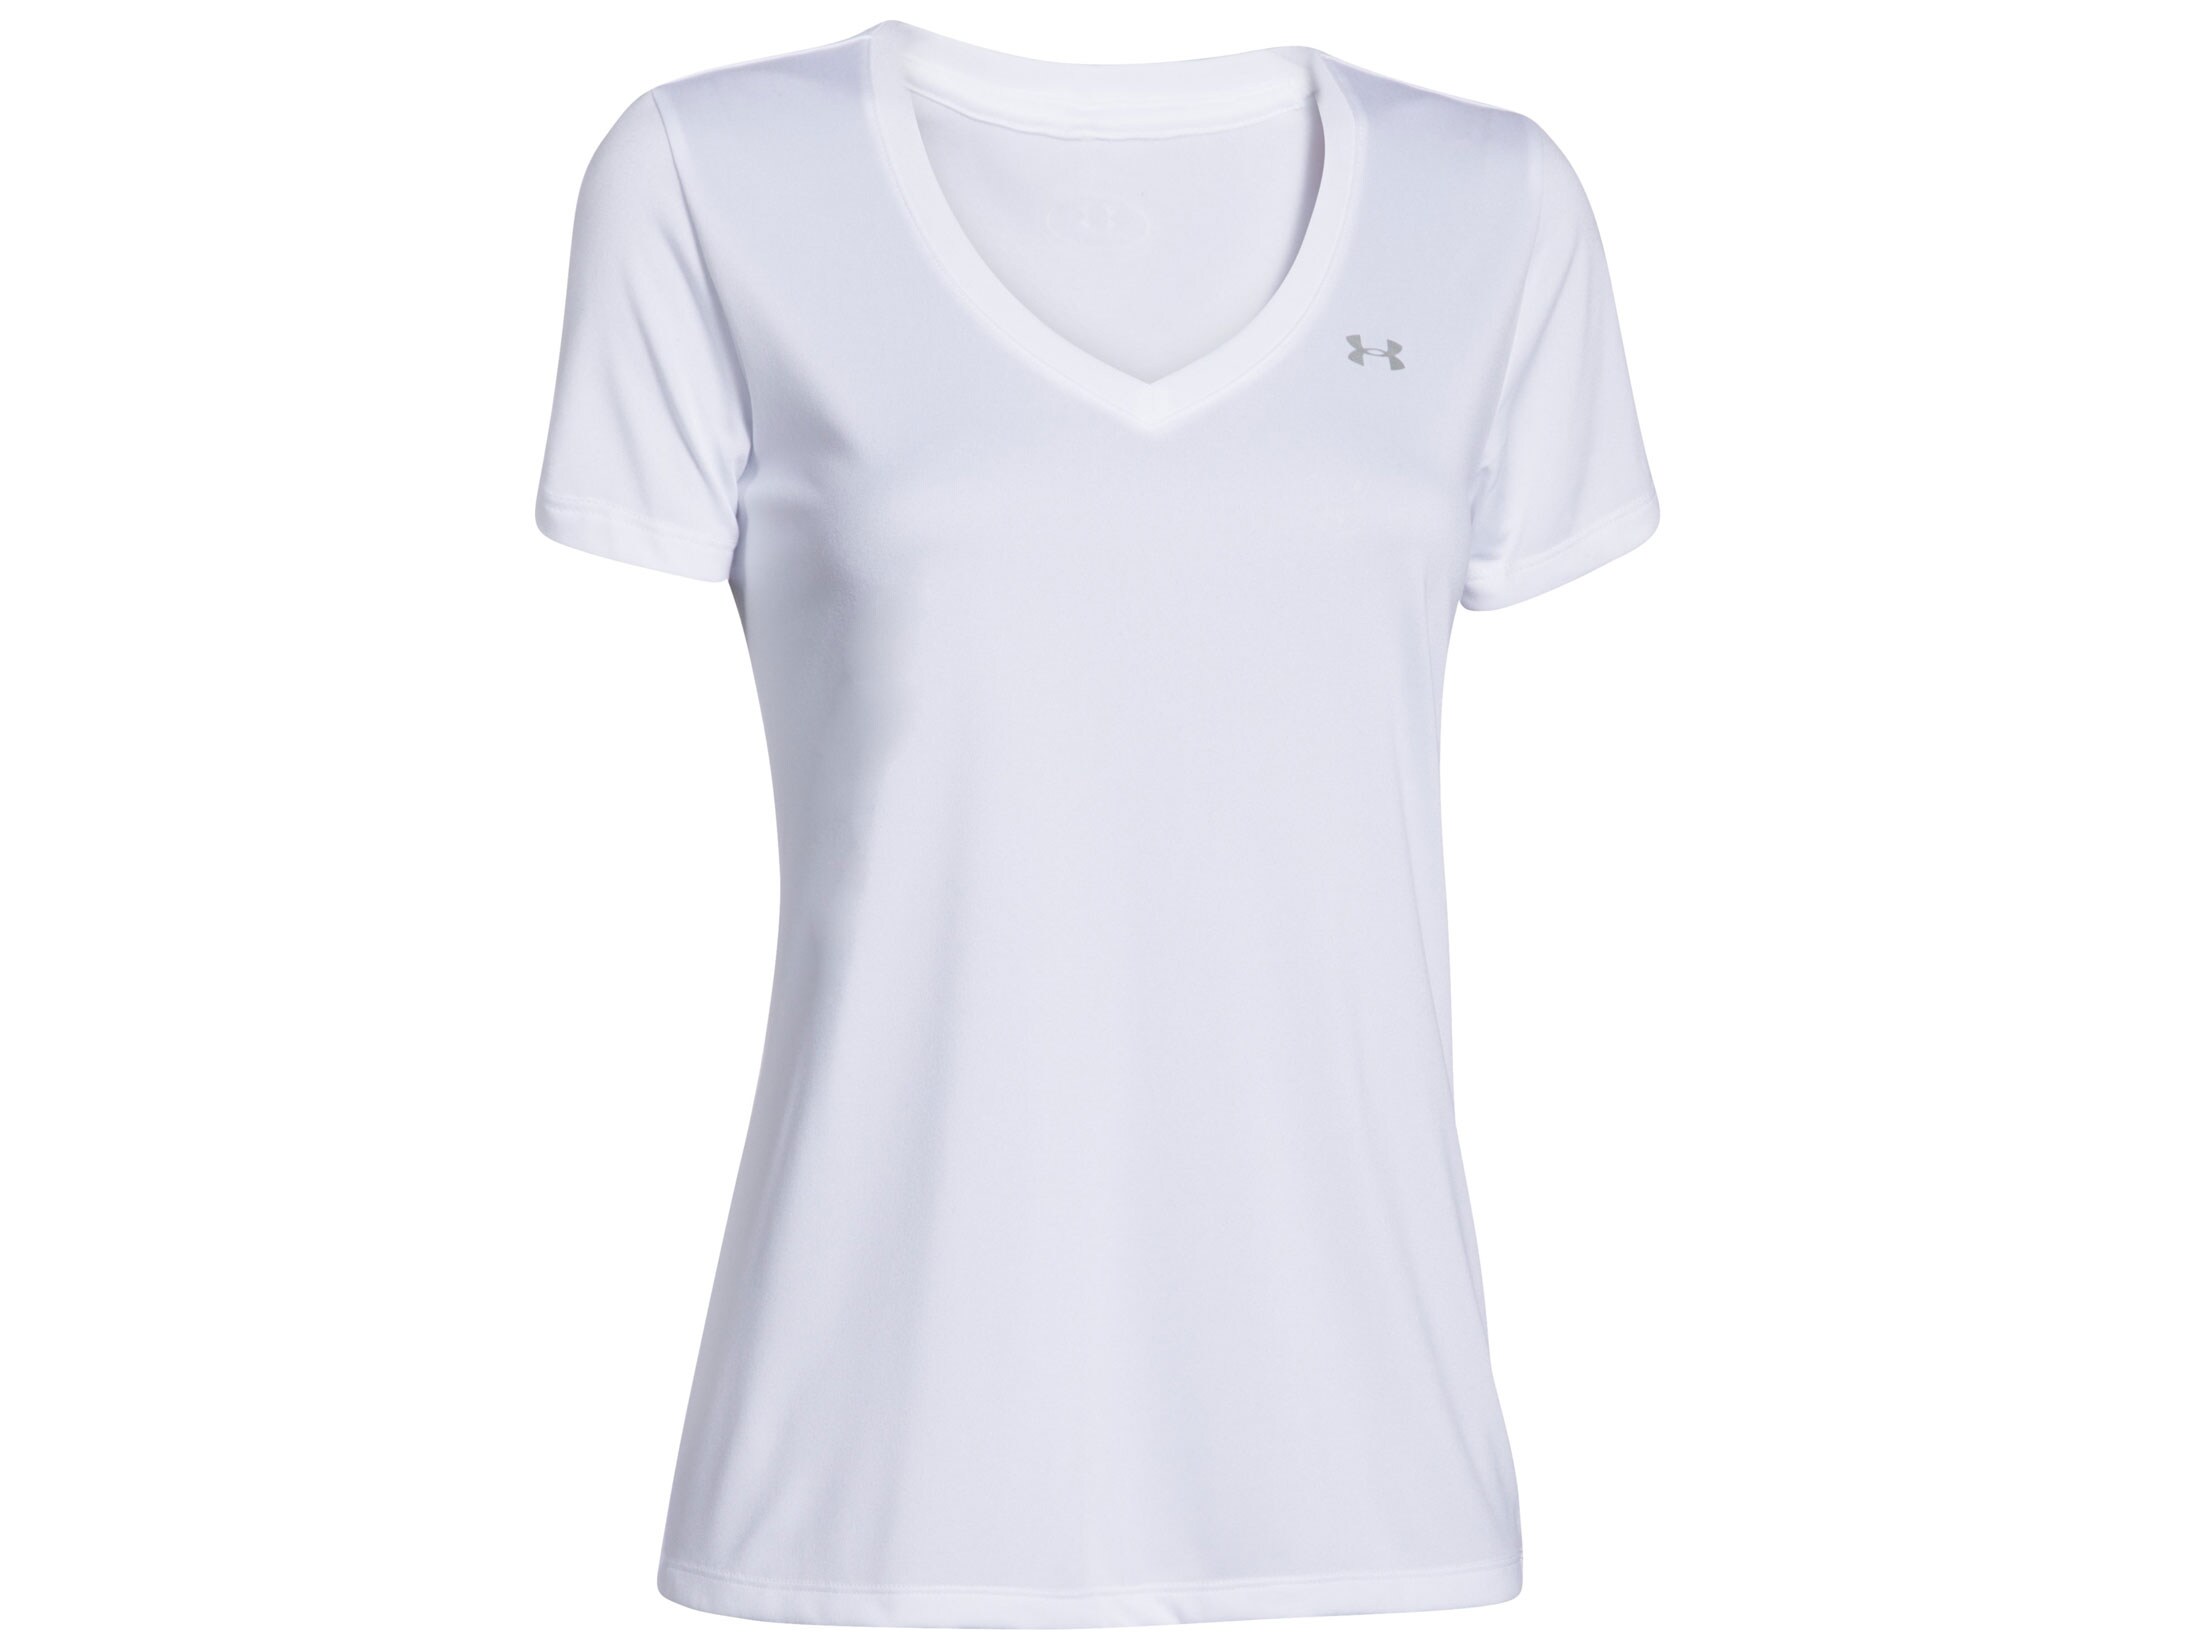 Under Armour Women's Tech Short Sleeve T-Shirt Polyester White Large